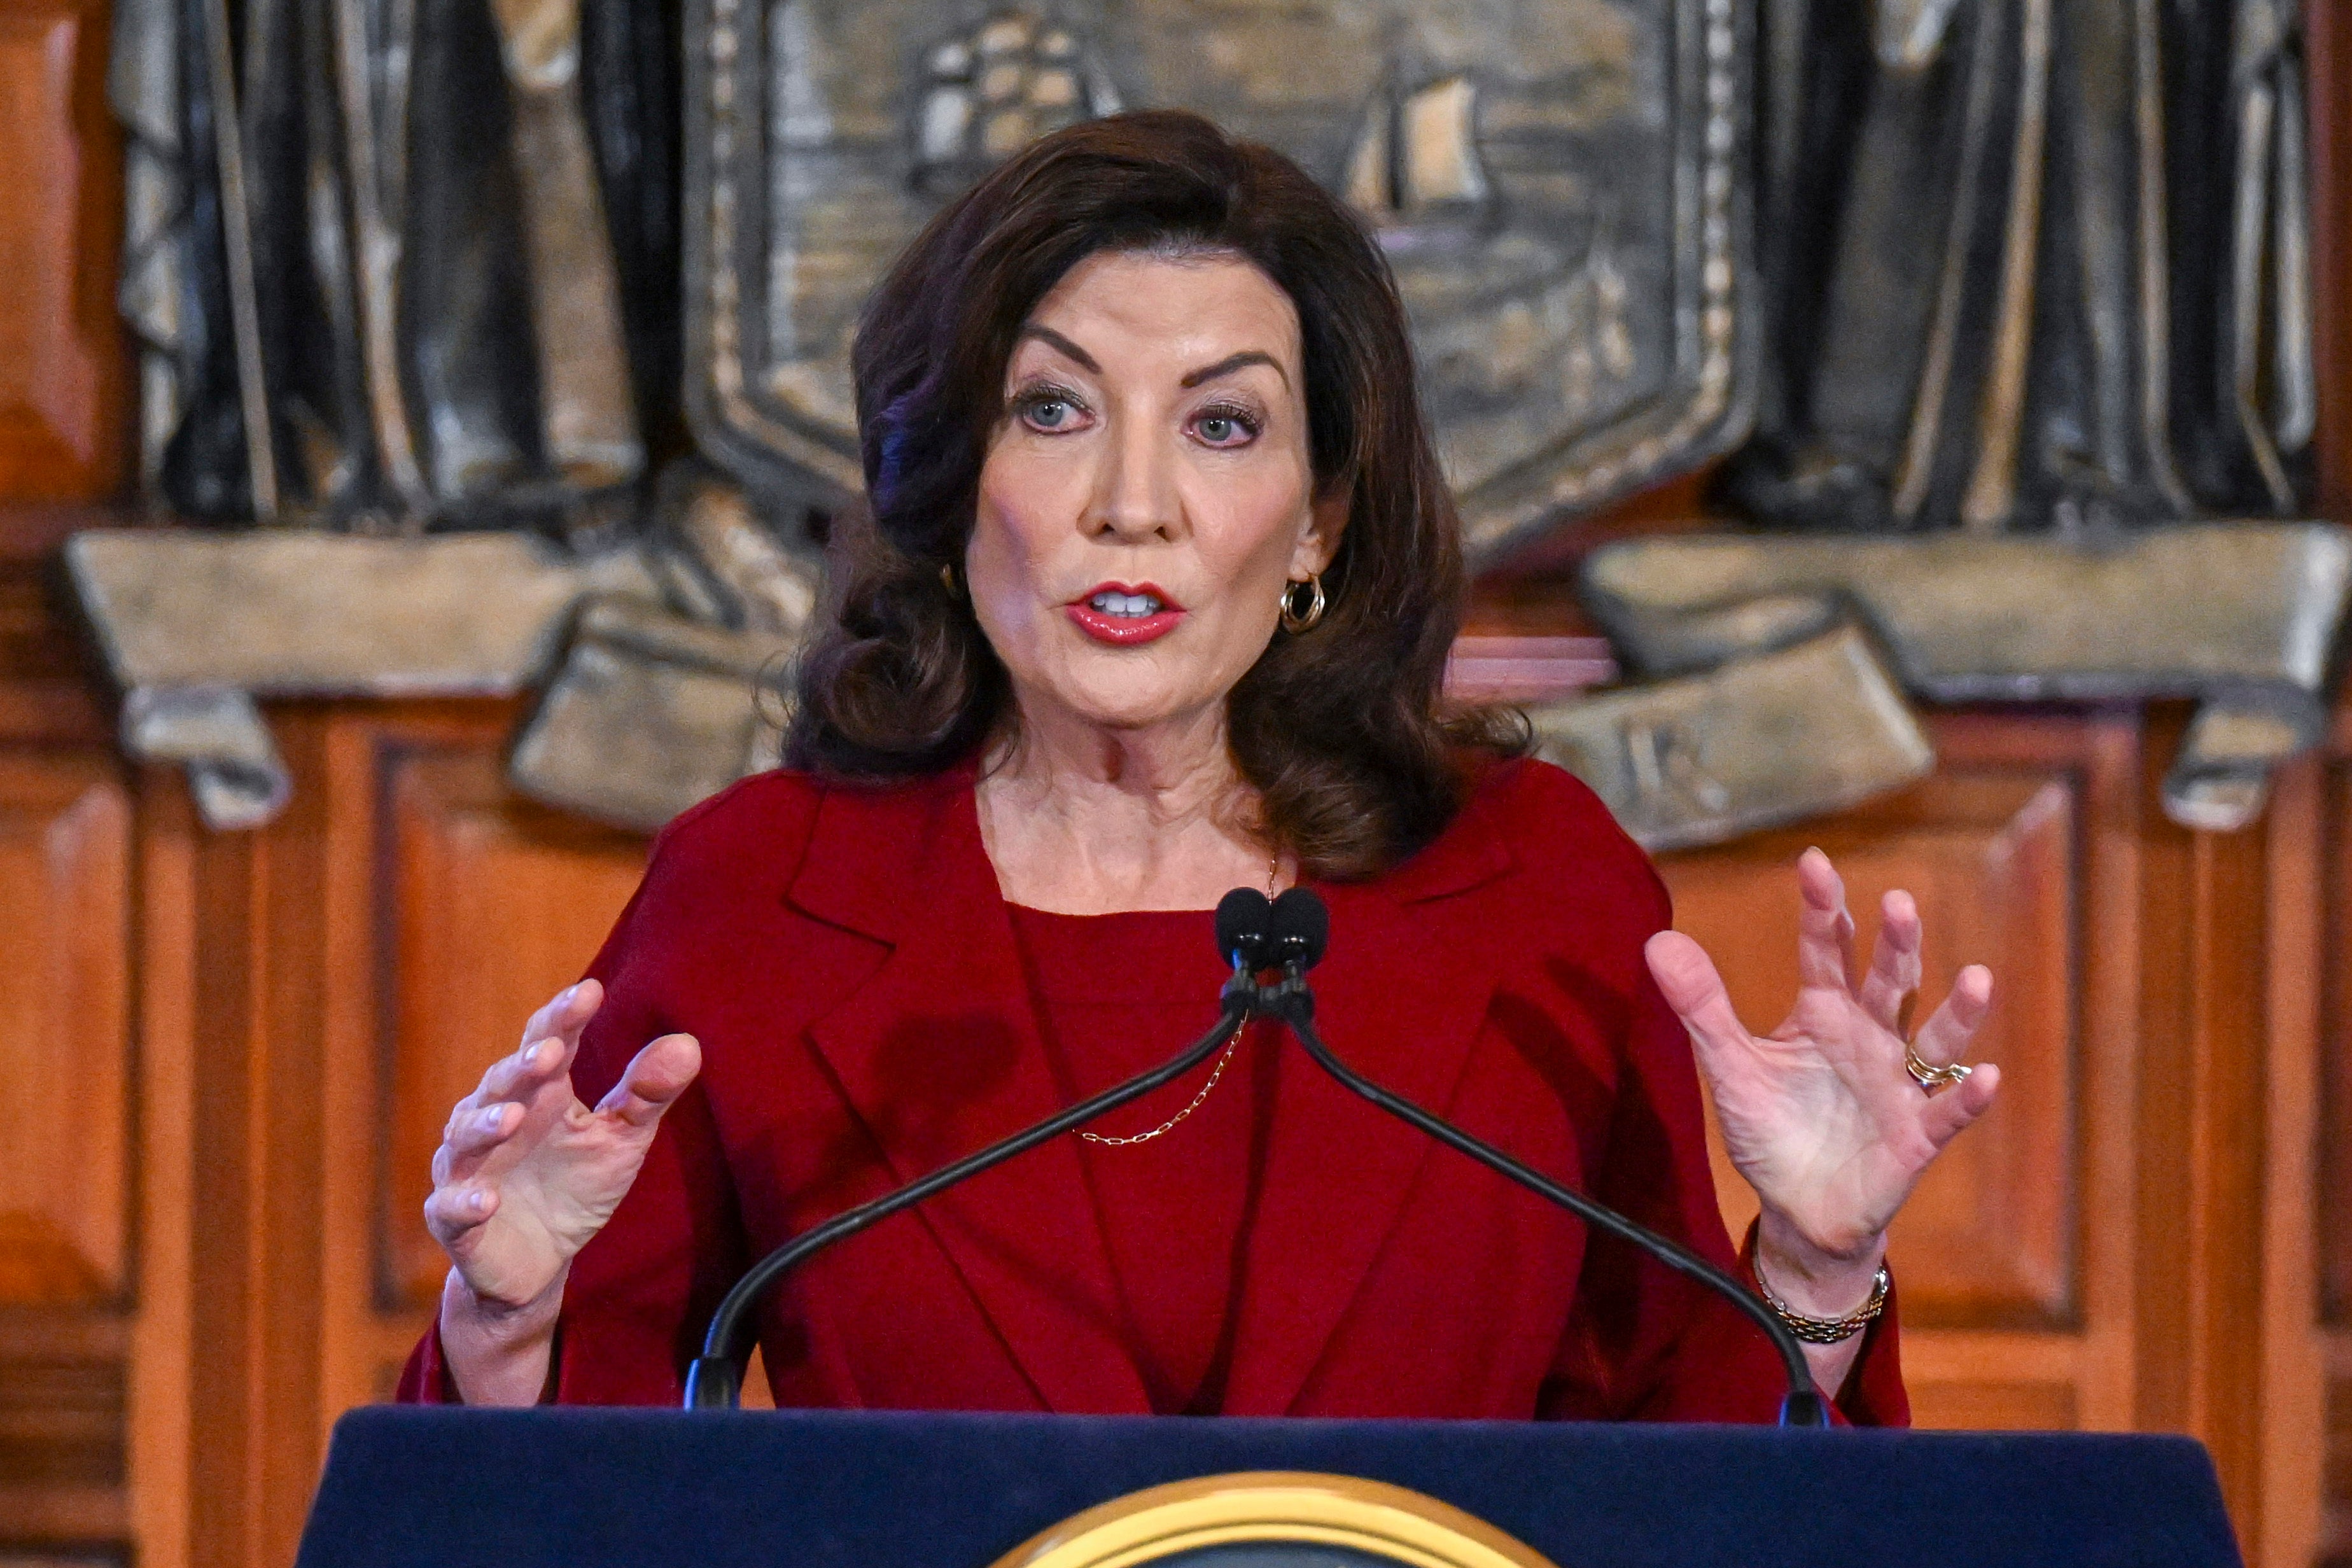 New York Governor Kathy Hochul condemned the incident